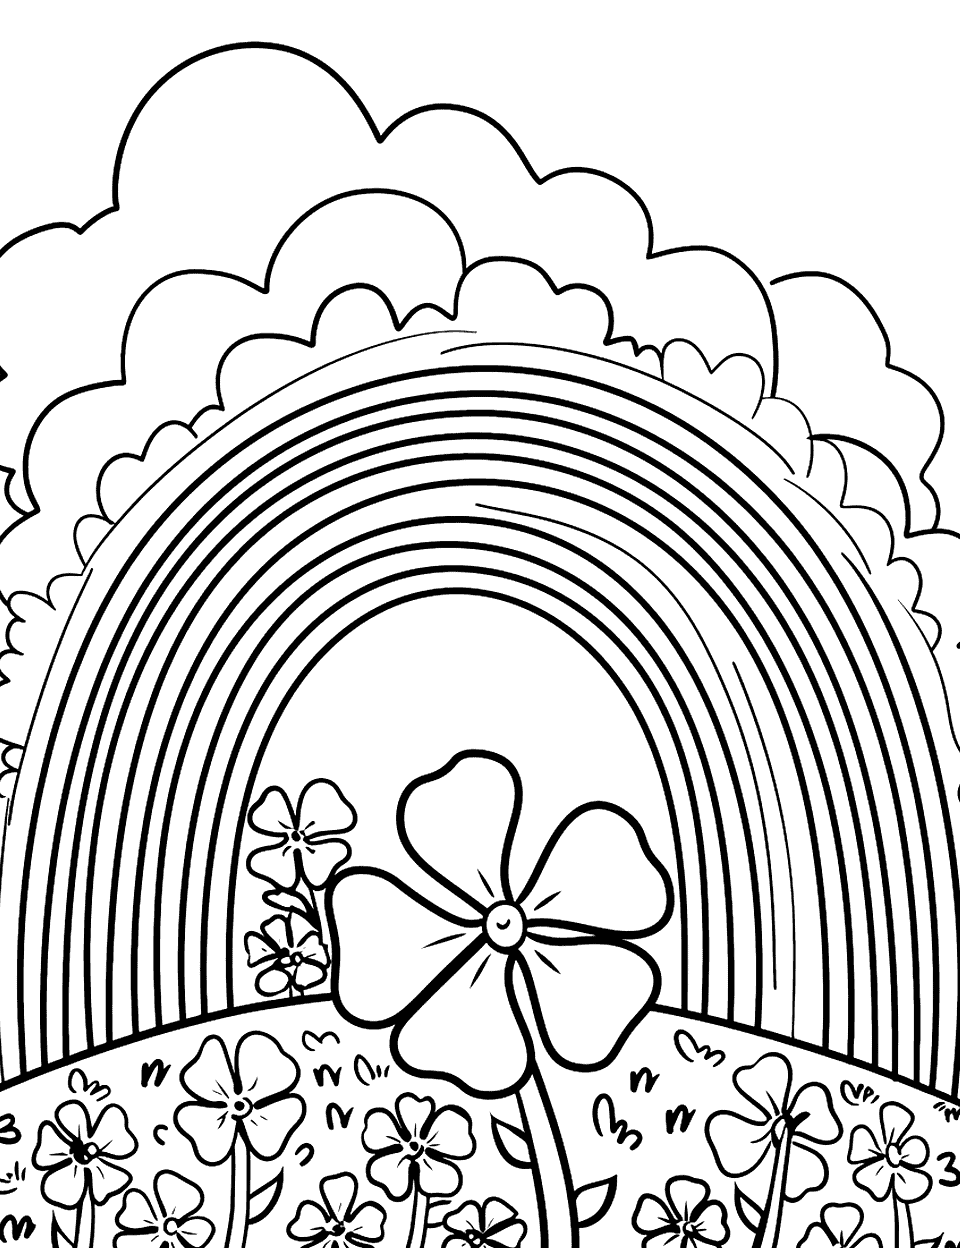 Rainbow Over a Shamrock Field Coloring Page - A rainbow arching over a lush field dotted with shamrocks.